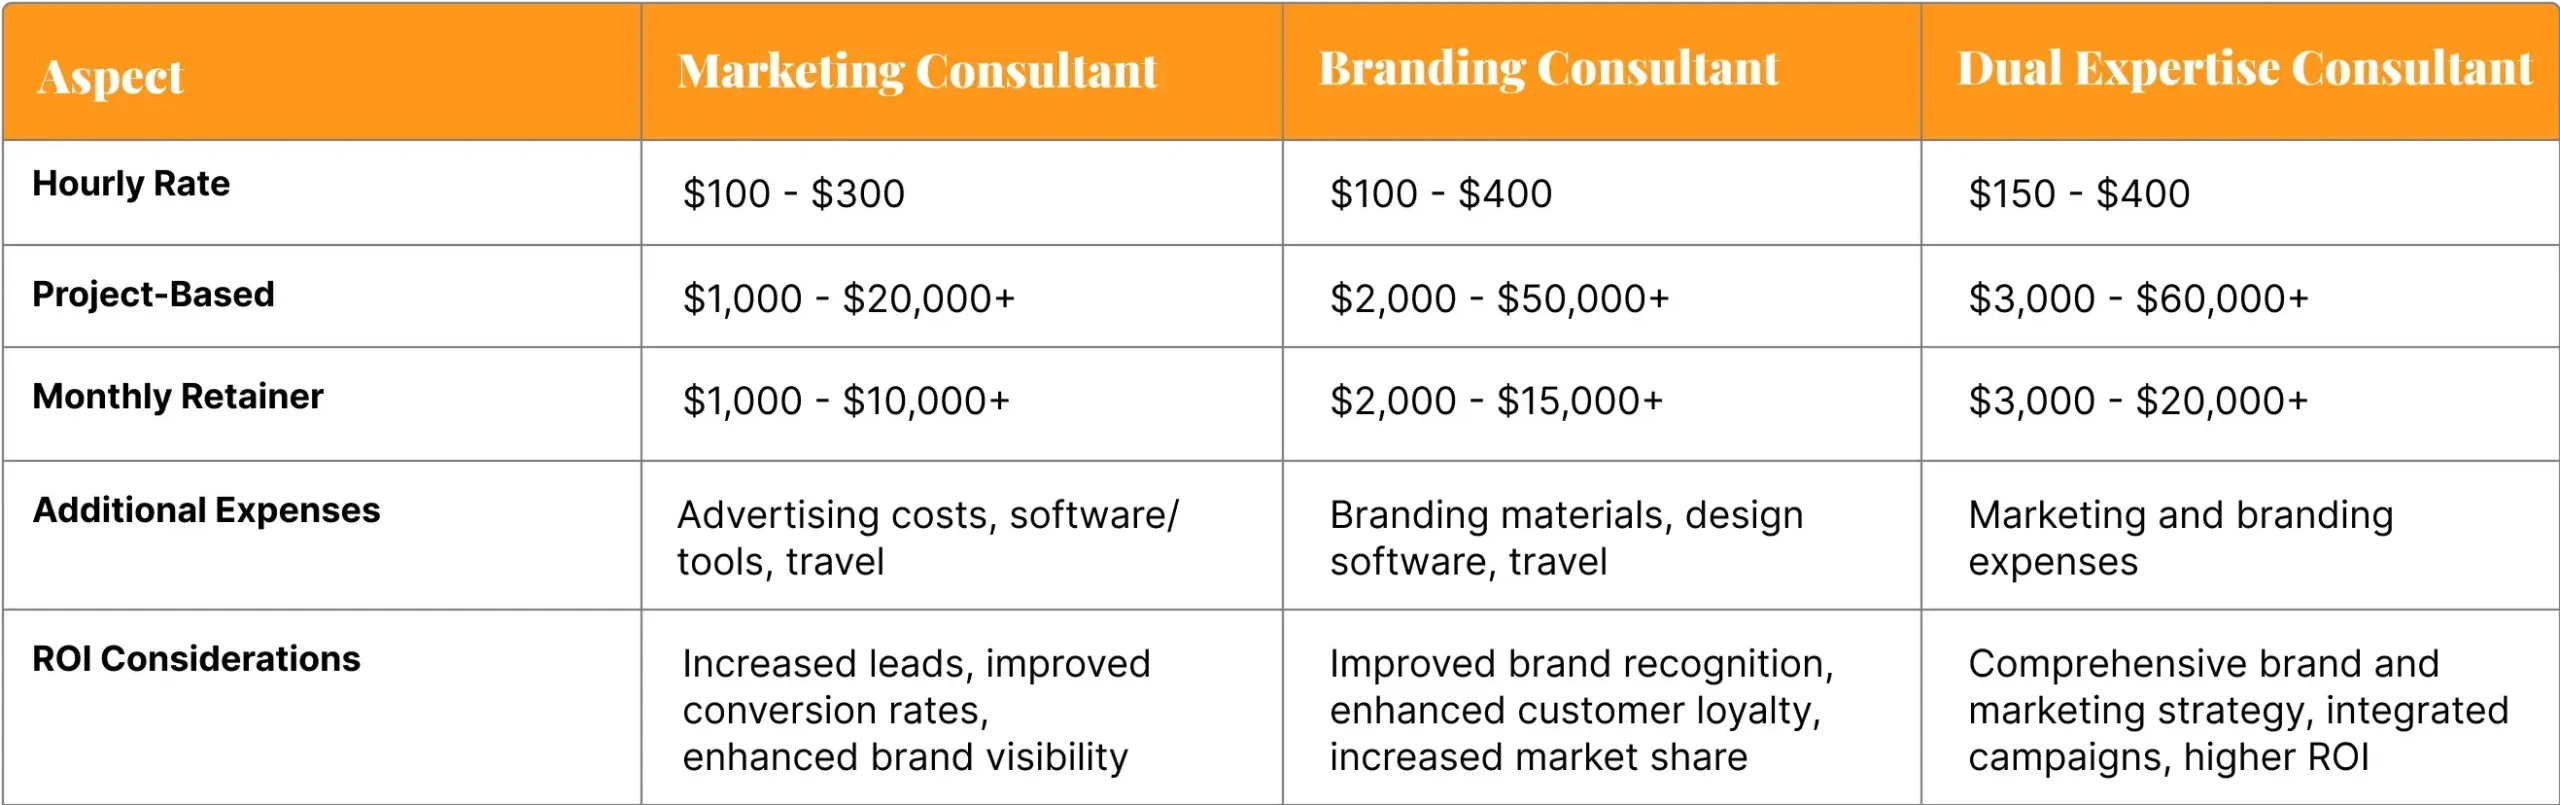 comparison-table-hiring-cost-marketing-and-branding-consultant